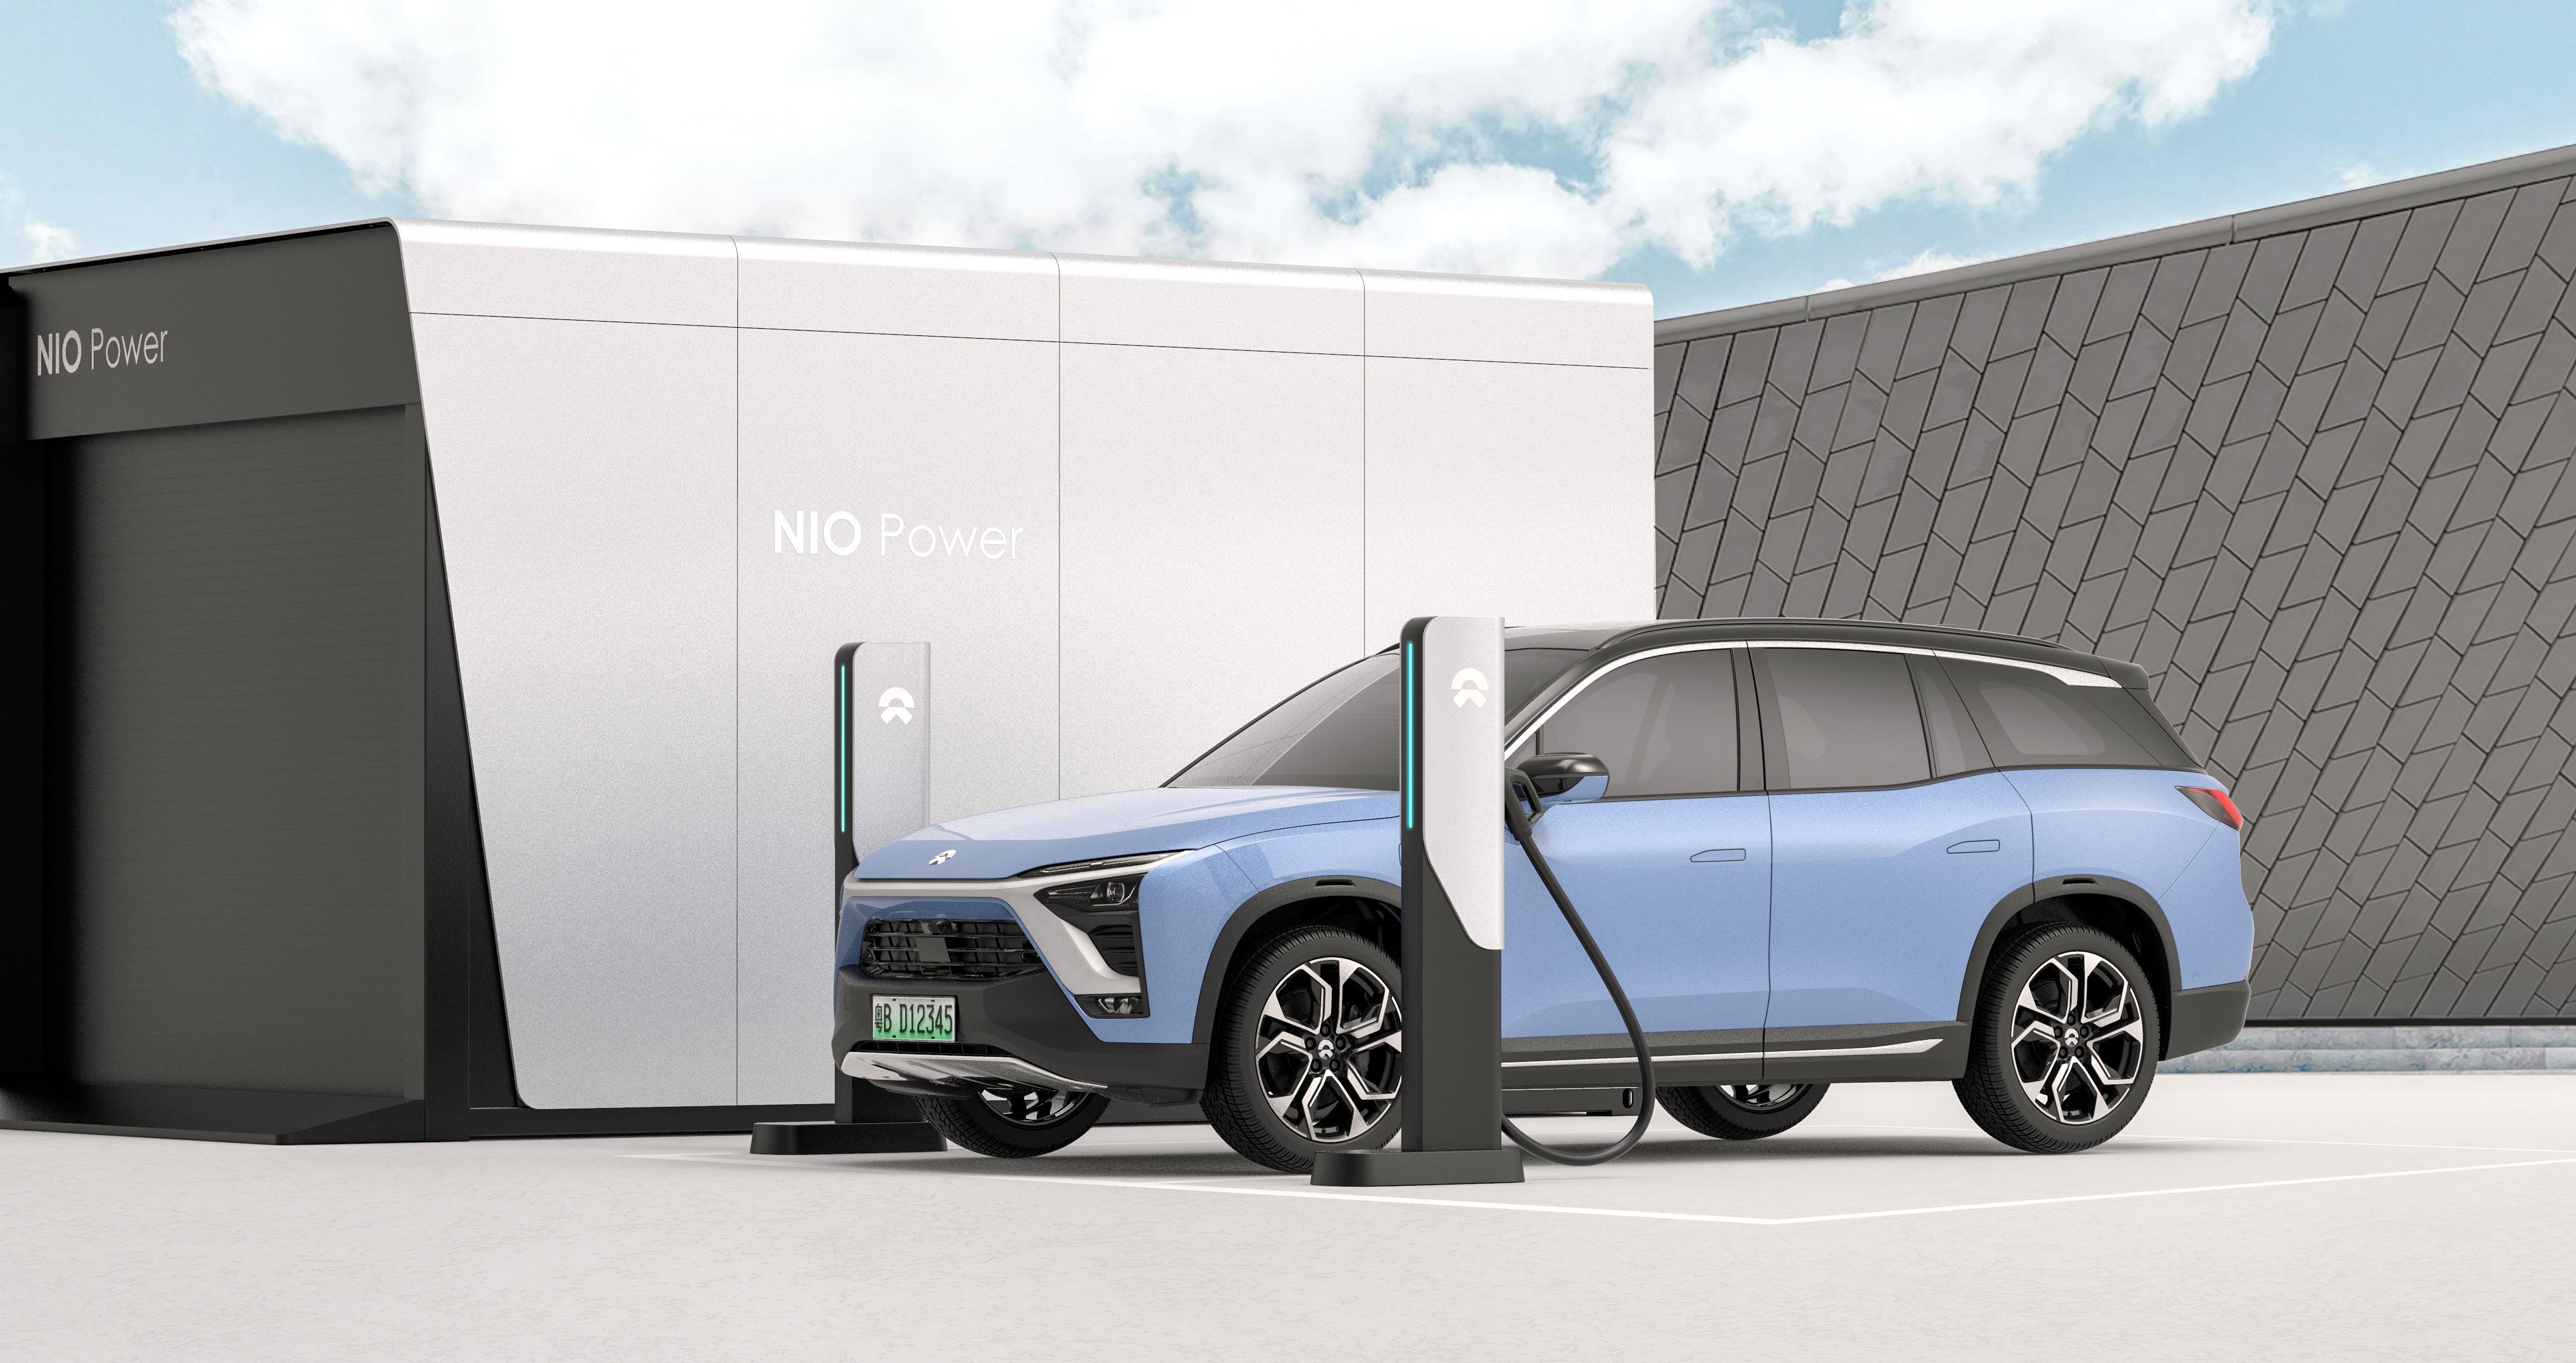 Nio will spin off its recharging business to raise funds independently